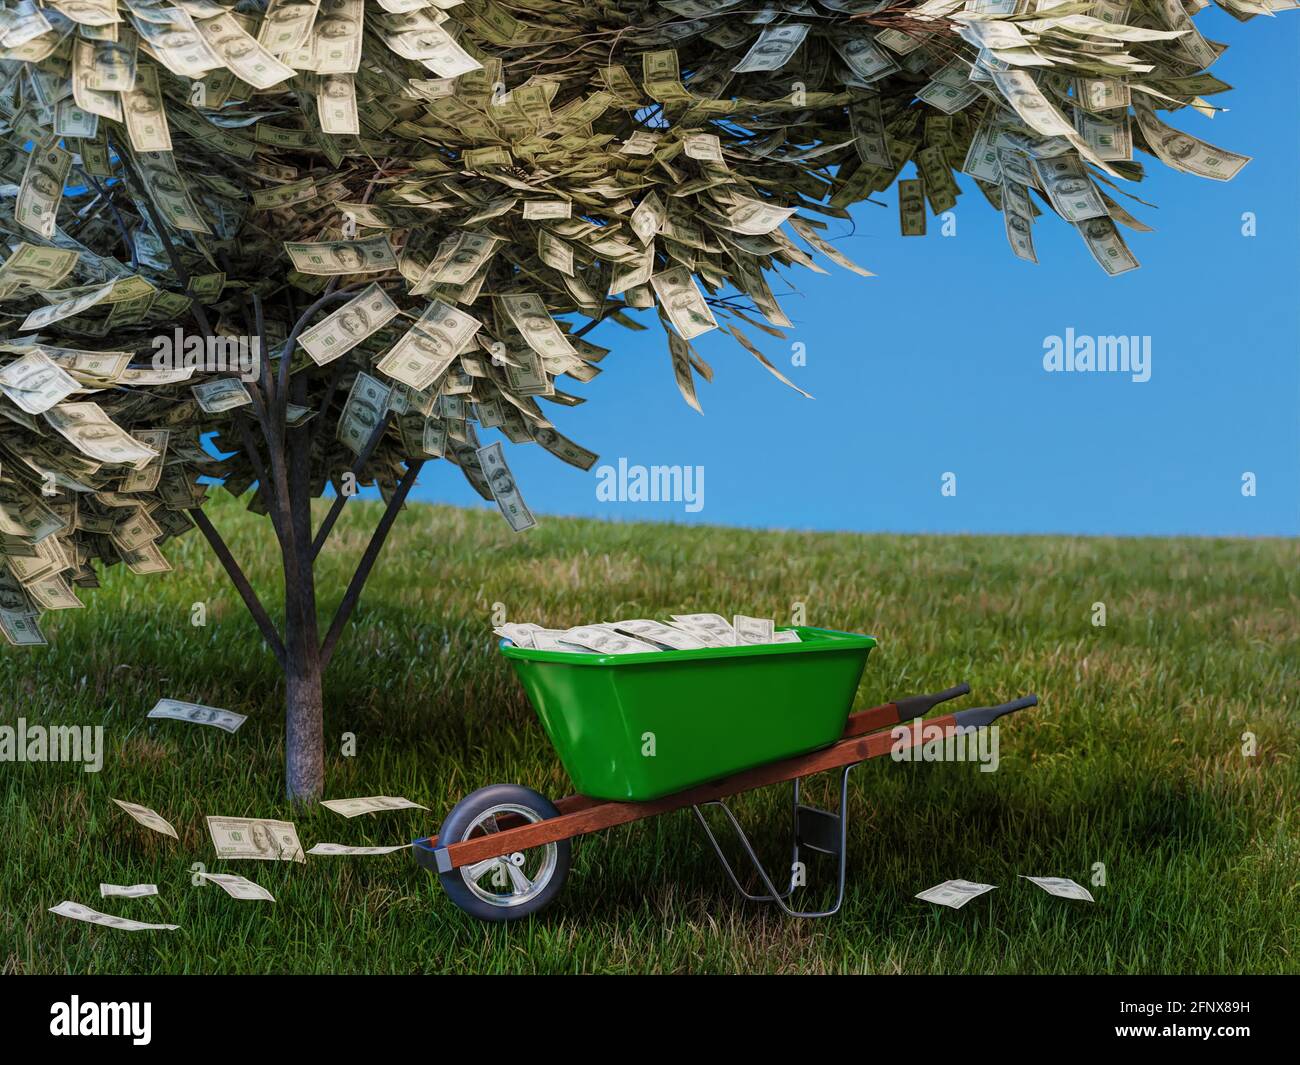 3D rendering of green wheelbarrow filled with 100 US dollar banknotes collected from money tree growing on a grassy meadow Stock Photo